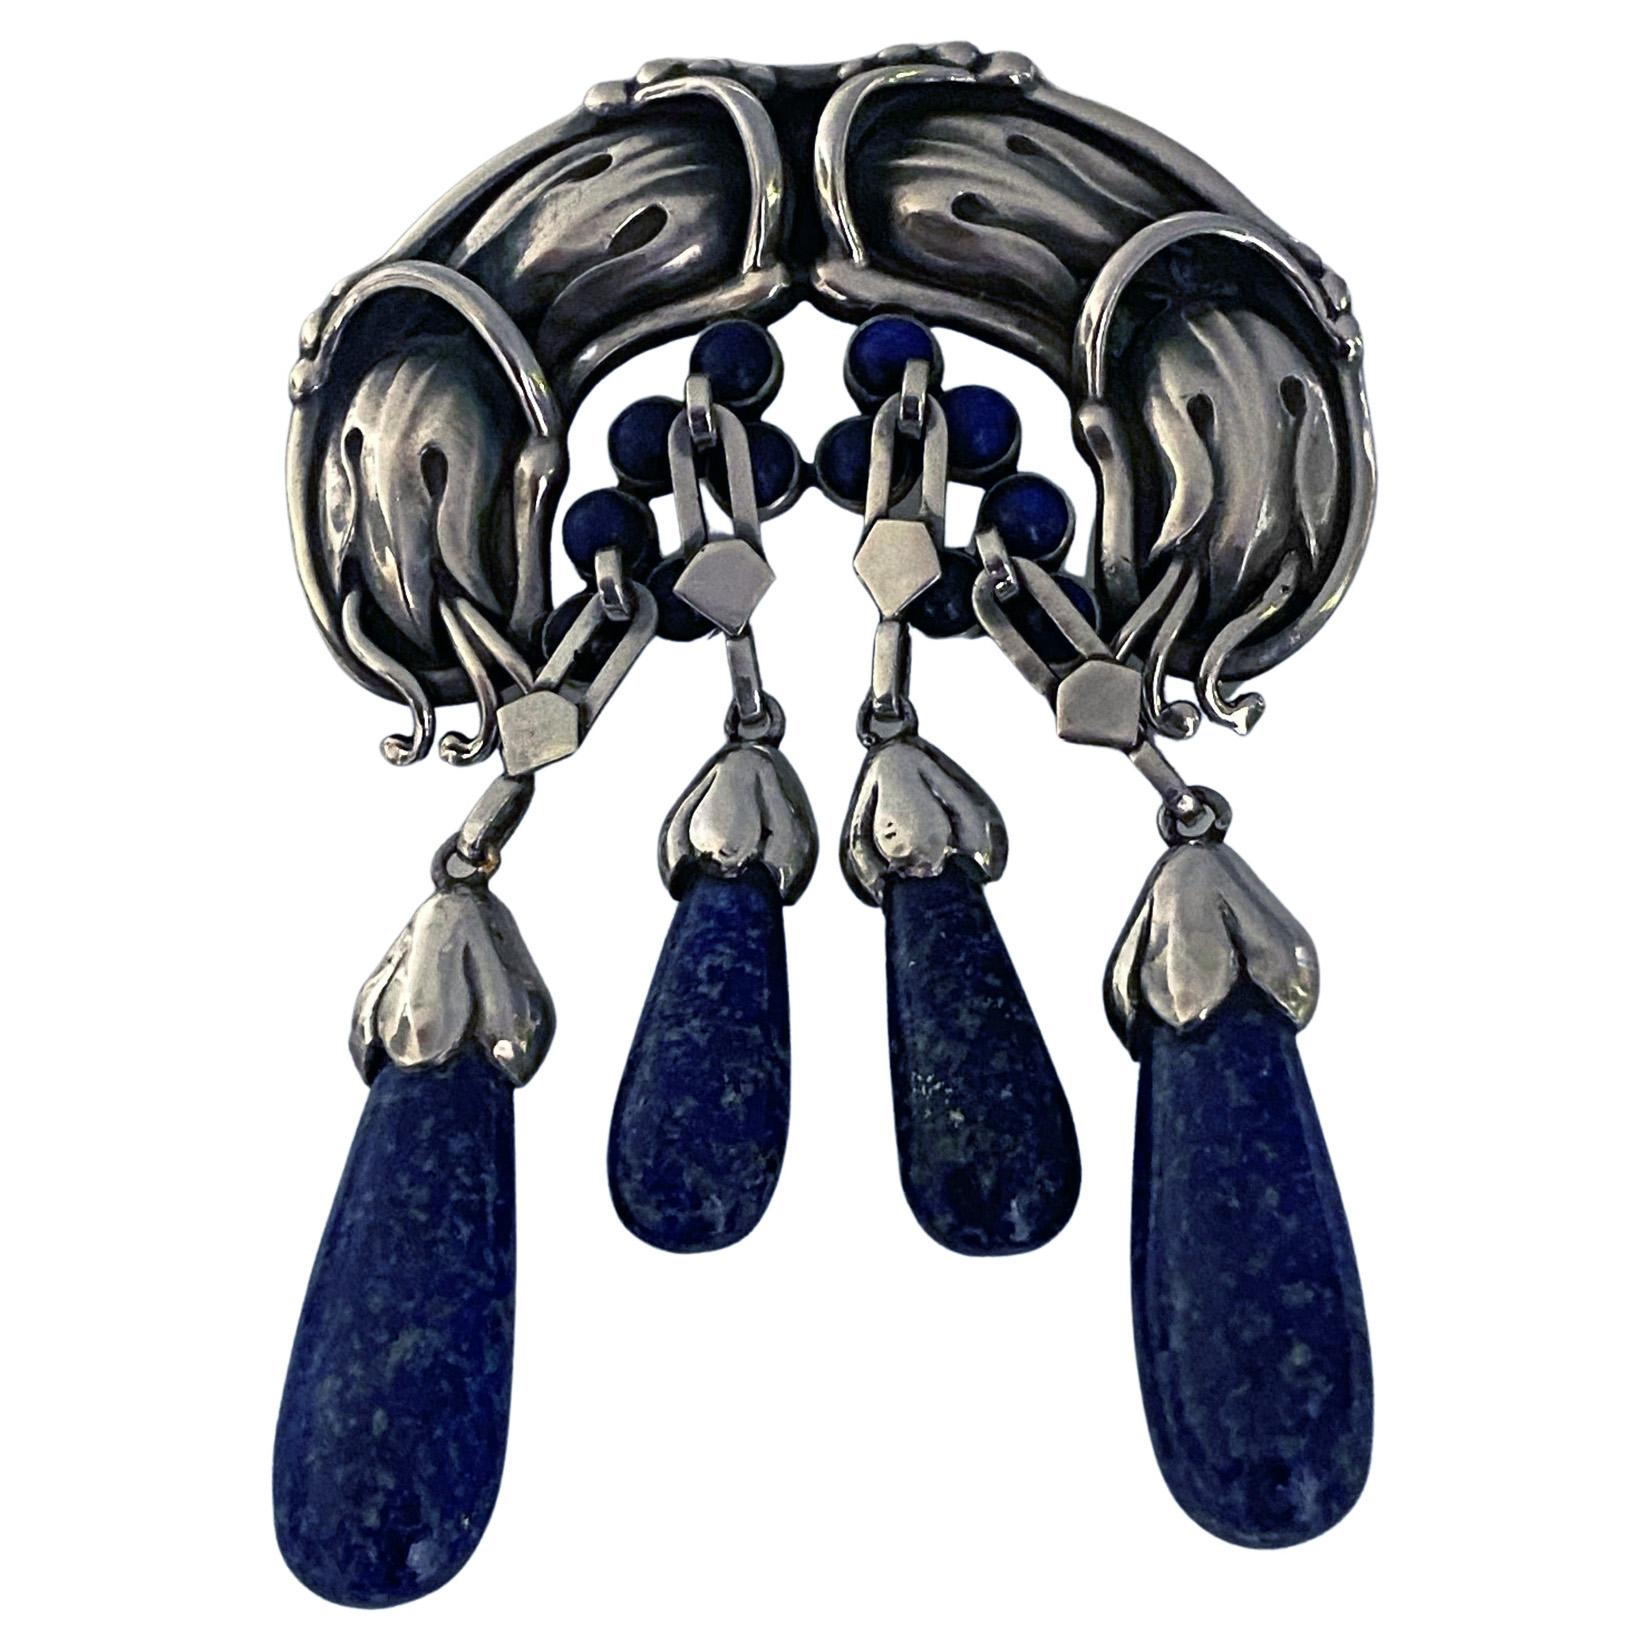 Important Georg Jensen Large rare Silver Lapis Lazuli Master Brooch, C.1930. Georg Jensen. Designed as elaborate foliate and bud motifs set with and suspending lapis lazuli cabochons and drops, no. 22, 9.10 cm, width 7 cm. Item Weight: 64 grams.